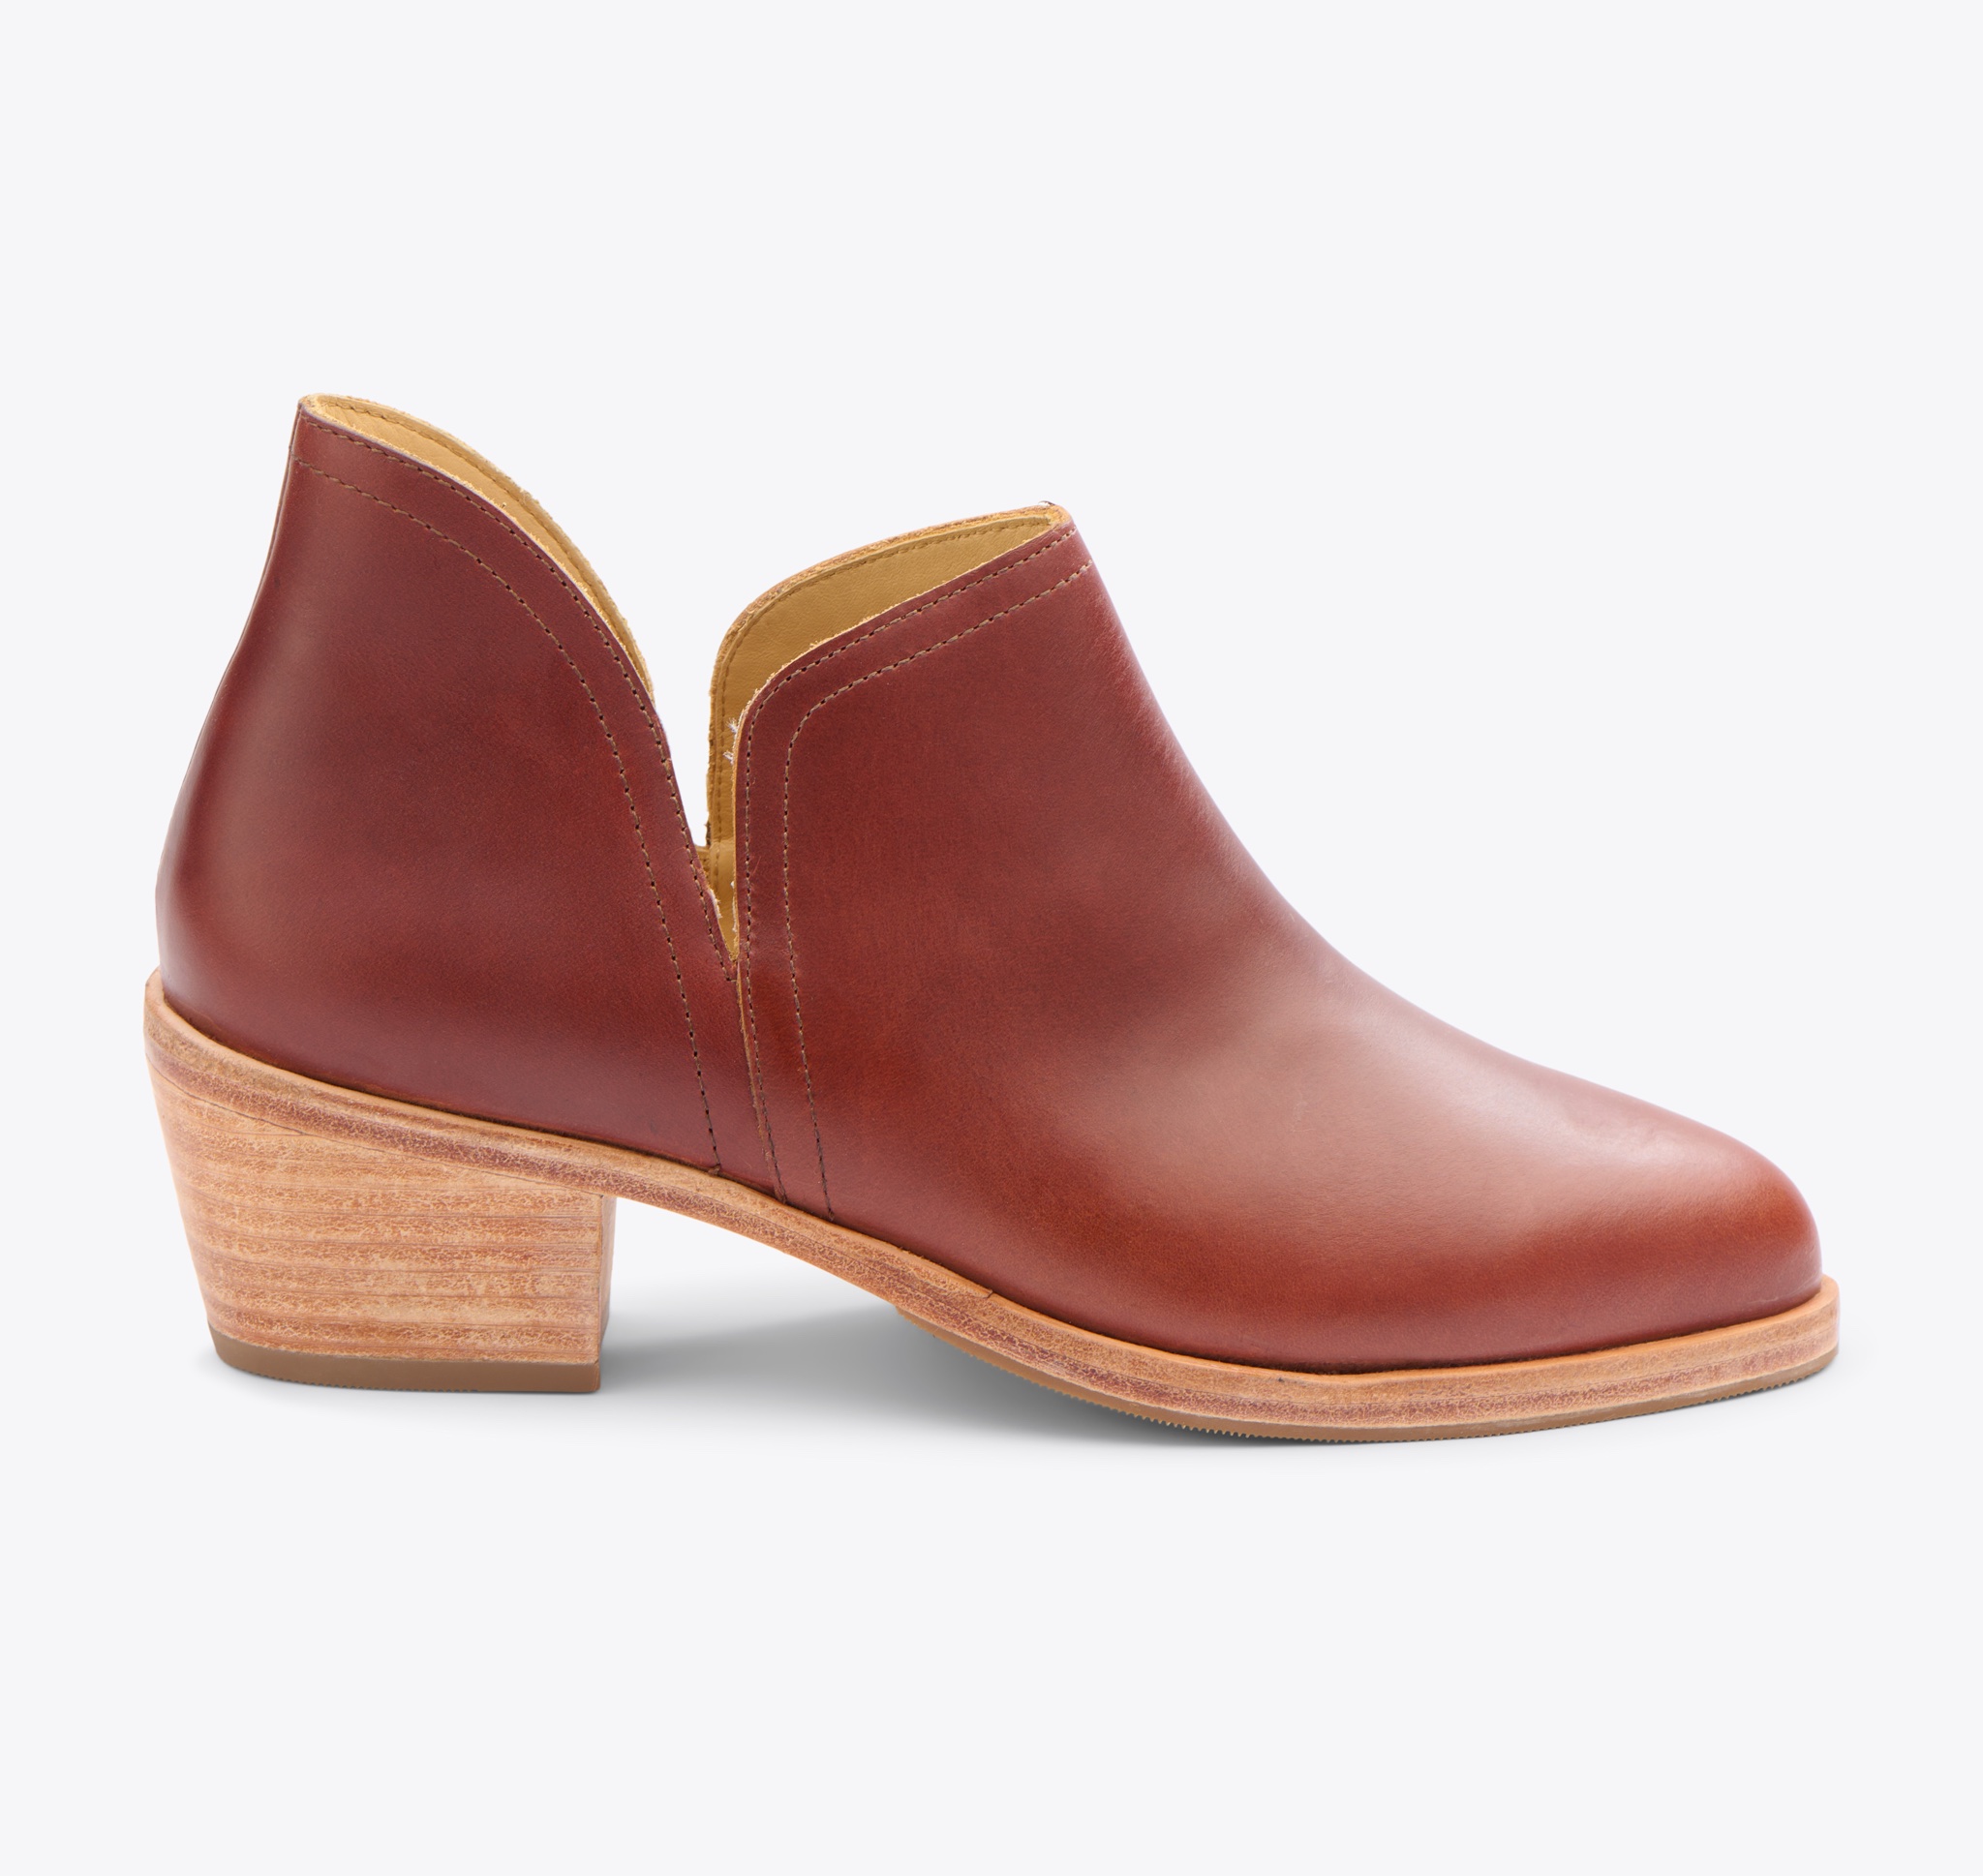 Nisolo Classic Ankle Bootie Brandy - Every Nisolo product is built on the foundation of comfort, function, and design. 